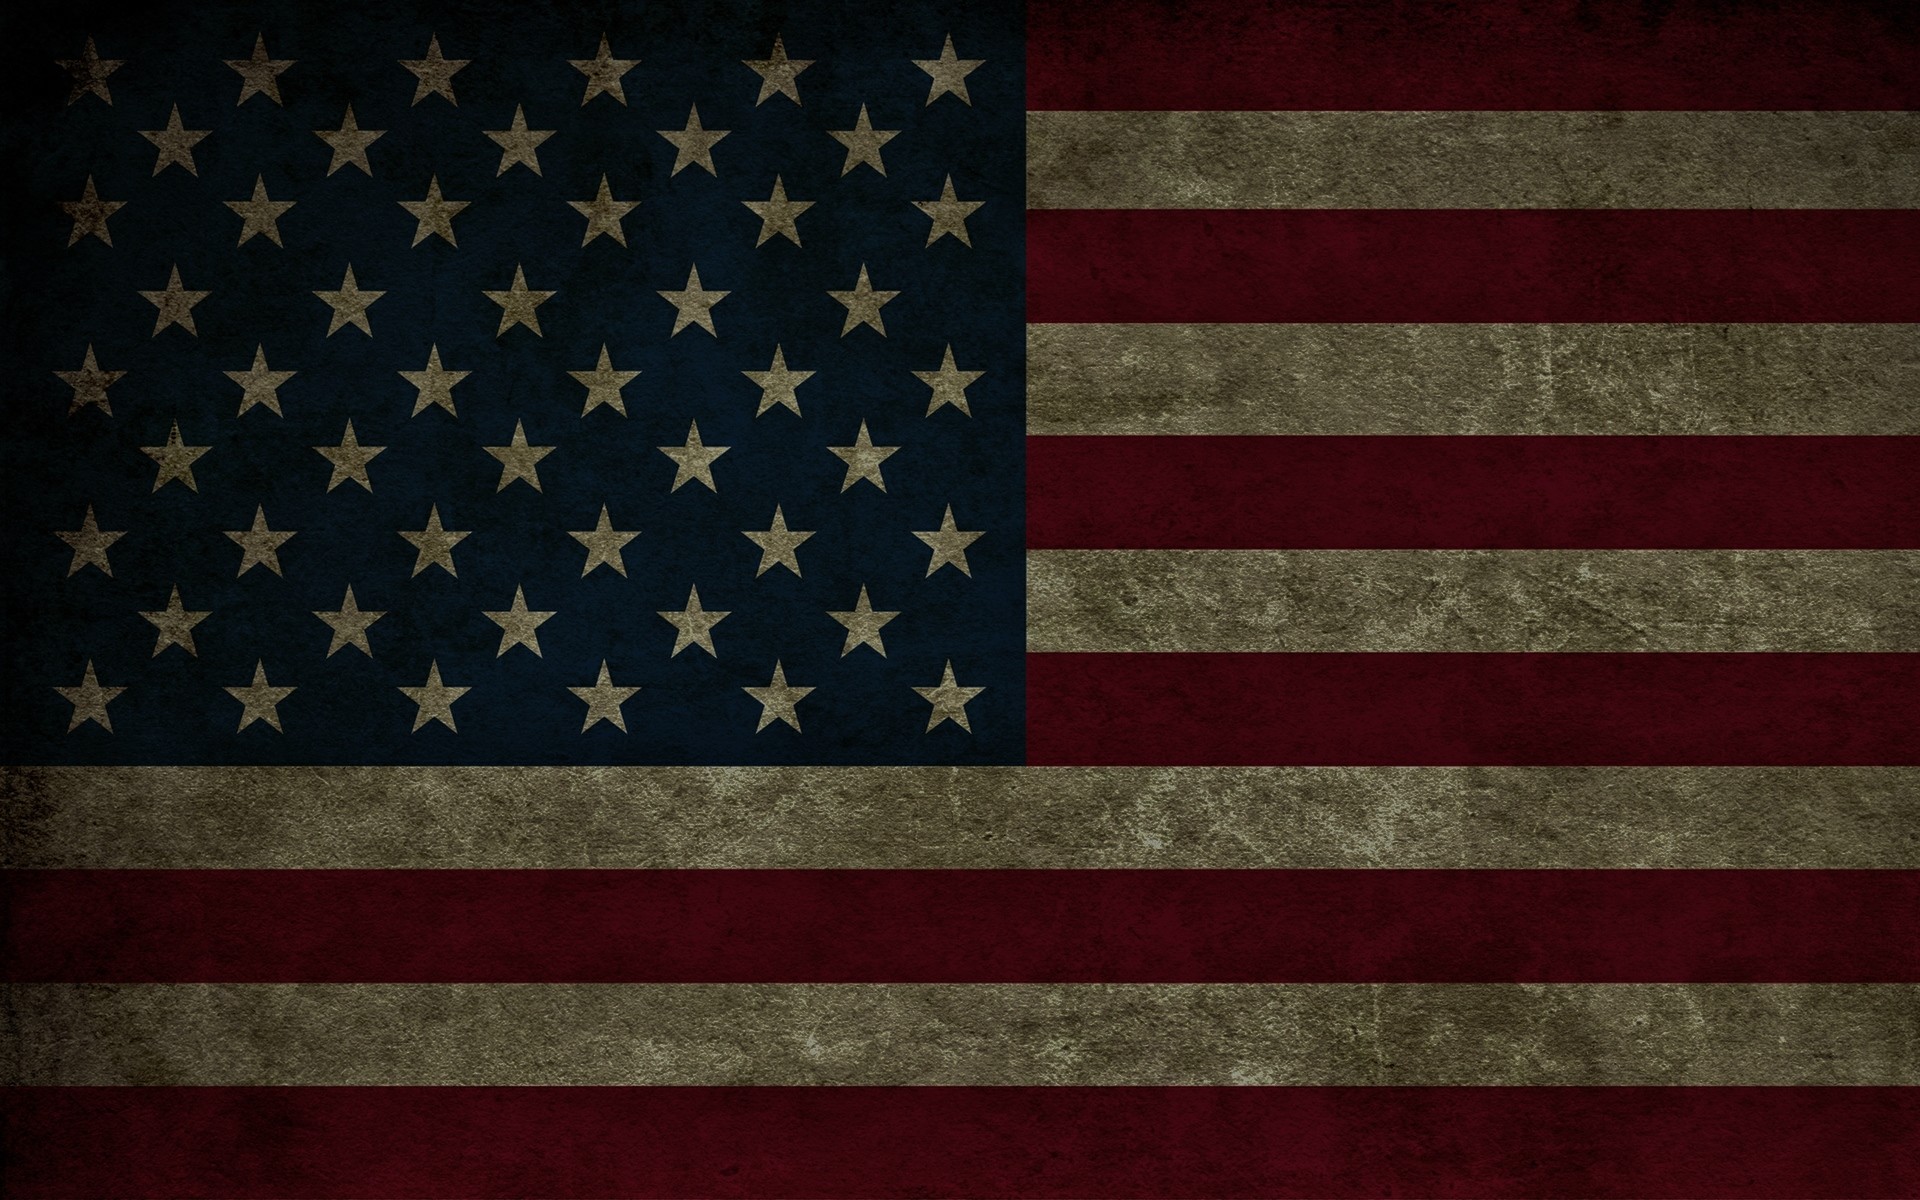 1920x1200 Flag wallpaper Gallery| Beautiful and Interesting  Images,Vectors,Coloring,Cliparts |Free Hd wallpapers